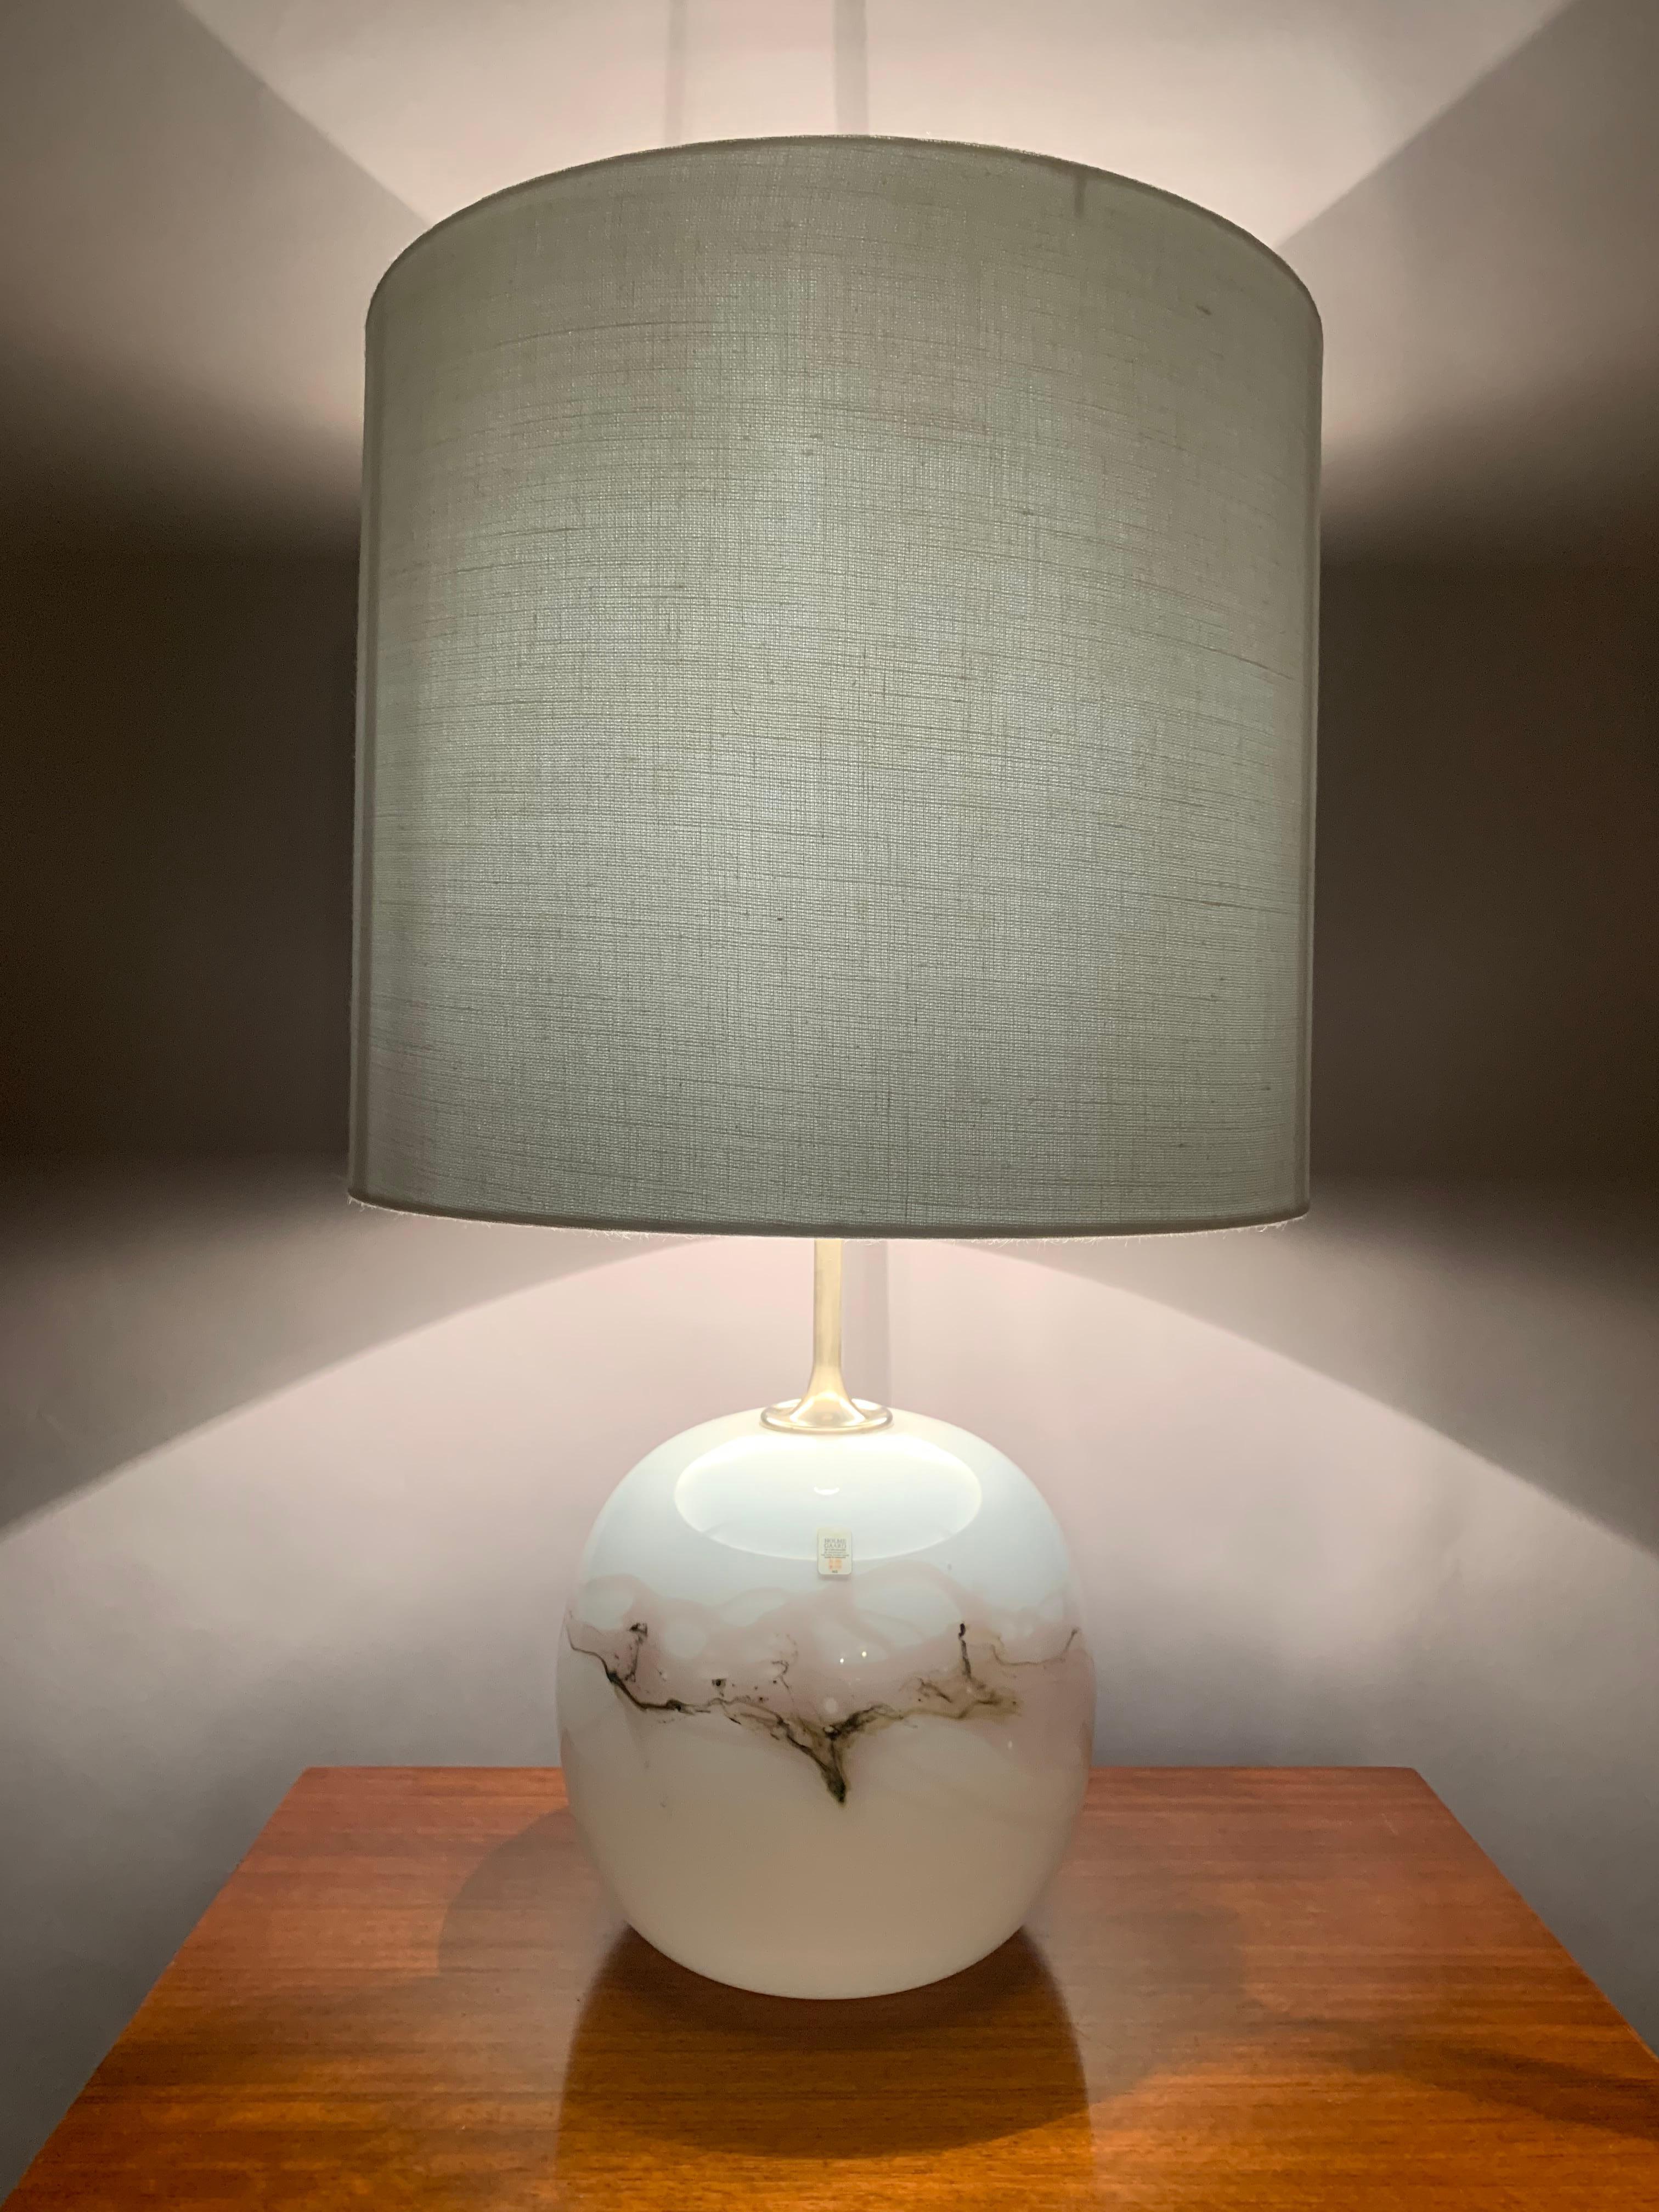 1980s Danish, opaline, art-glass table lamp, designed by Michael Bang for Holmegaard. The lamp was designed for their 'Sakura' design series. An abstract pattern of very pale pink and browns swirls around its circumference. A tall, thin, brushed